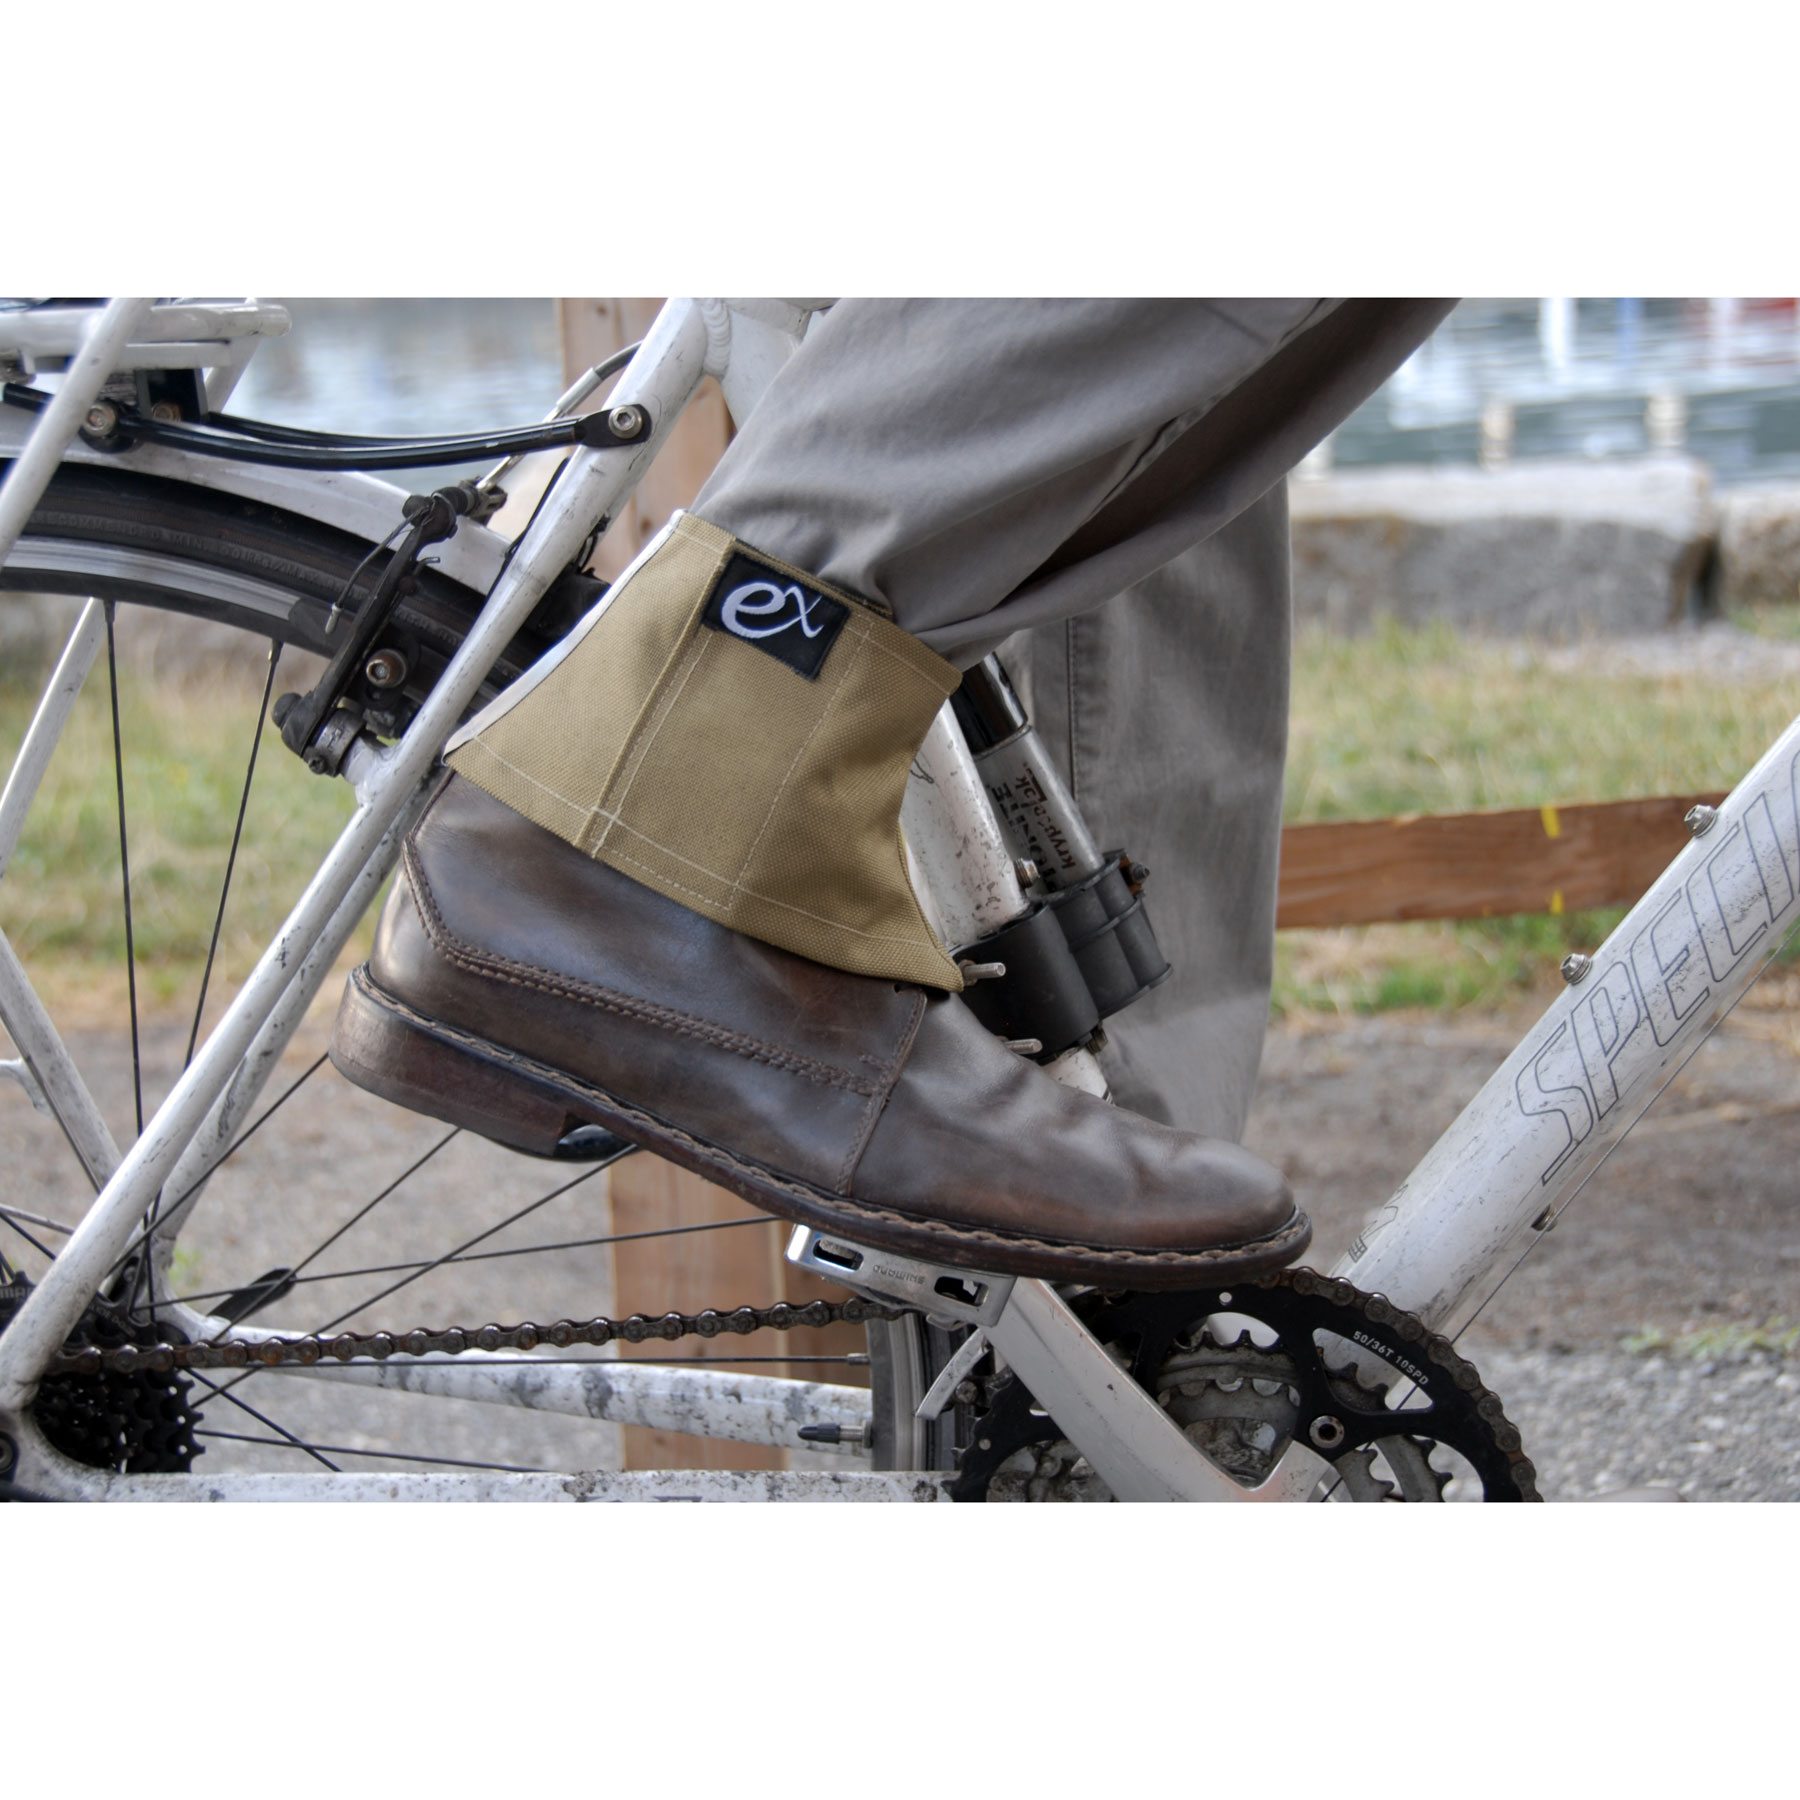 Leg Shield Bike Trouser Protector  Completely Protects Cyclists Trousers  from Grease and Chain Unlike Existing Straps and Clips  Comfortable Snug  Fit Easy OnOff 1 Unit  Amazoncouk Automotive